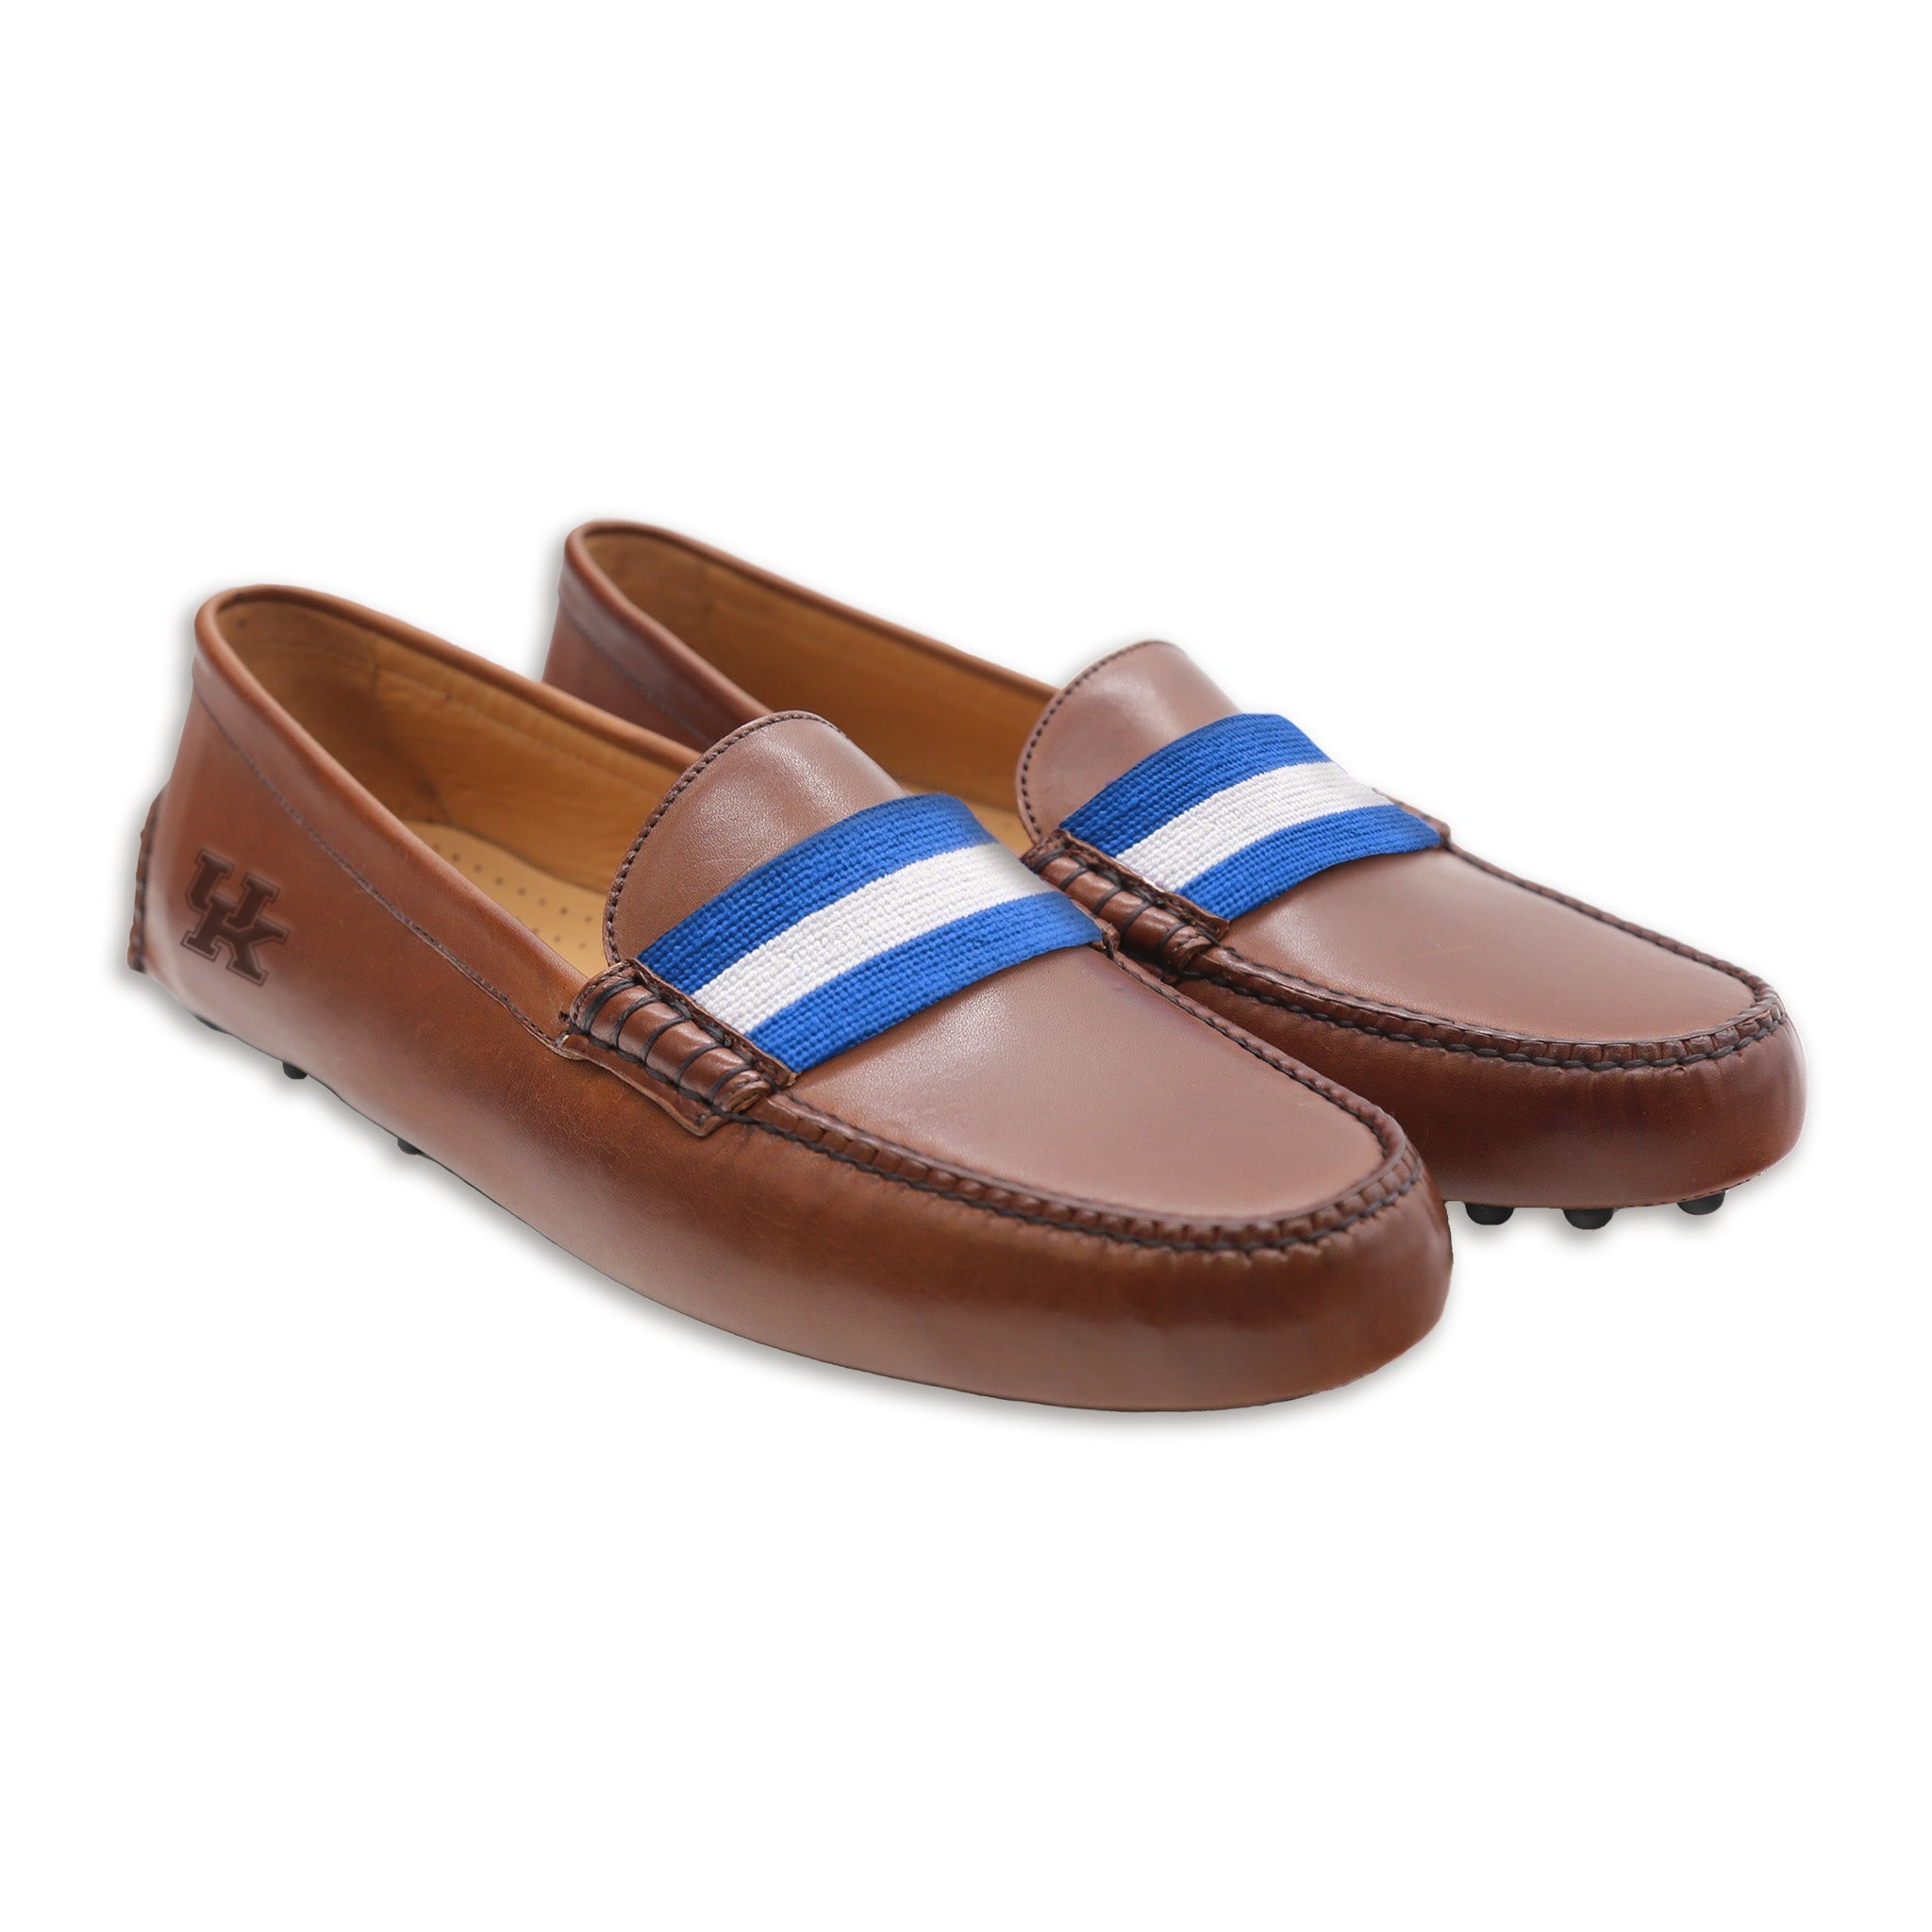 Leather-Logo) Shoes & (Chestnut (Blue-White) Branson Kentucky – Smathers Driving Surcingle